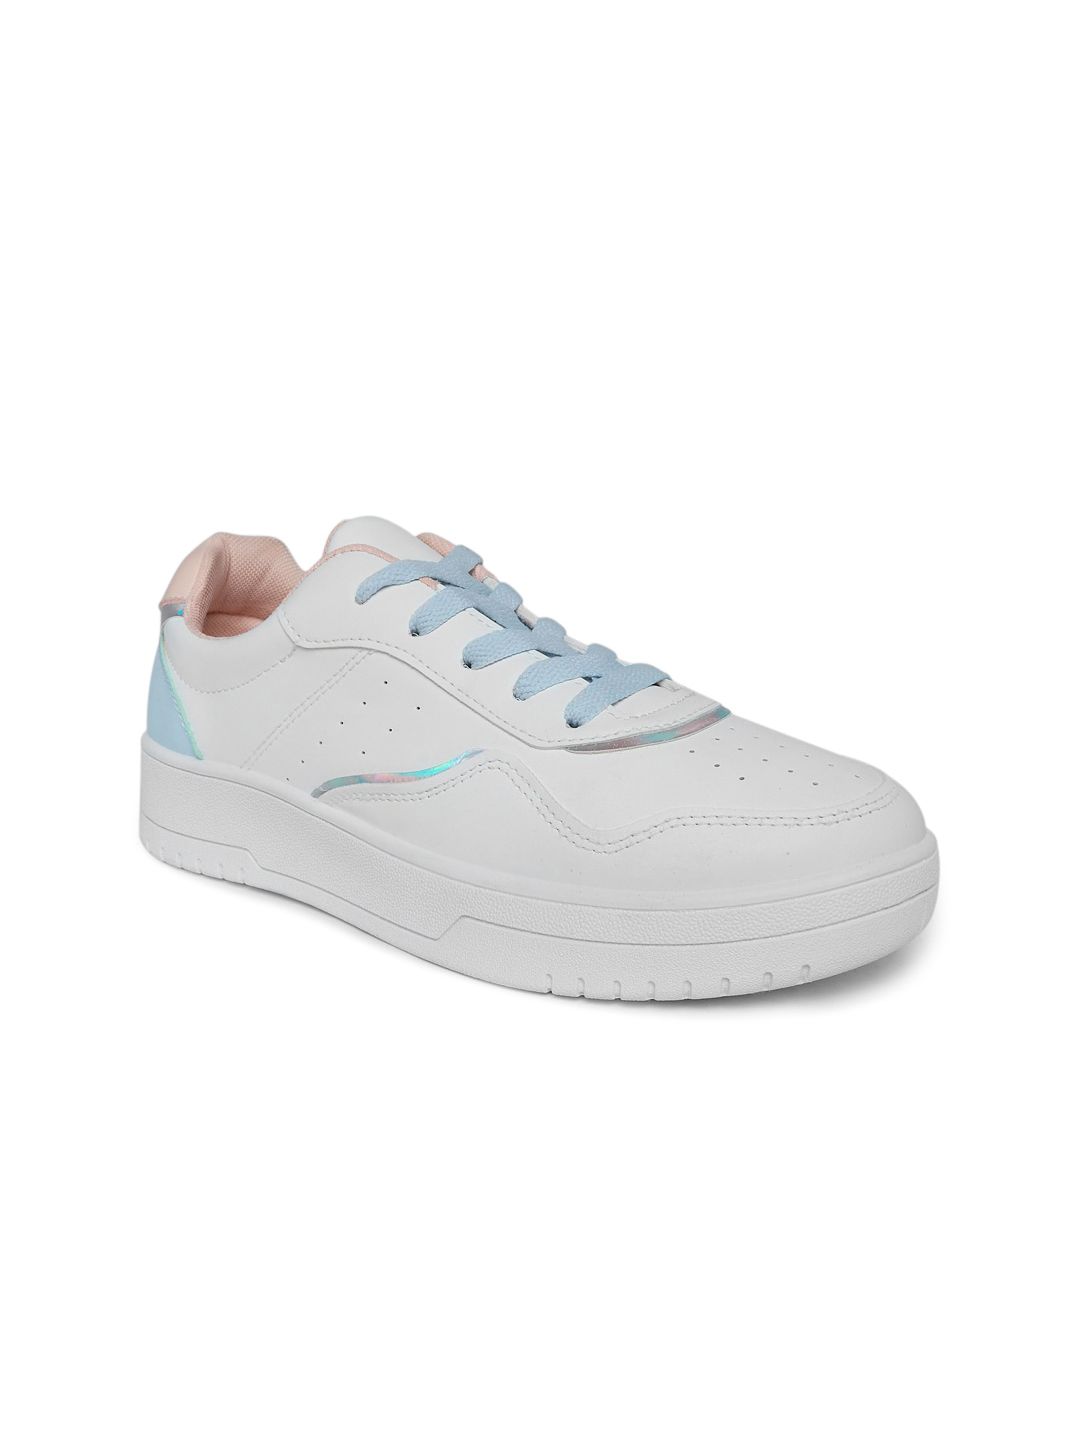 Forever Glam by Pantaloons Women White Solid PU Sneakers Price in India